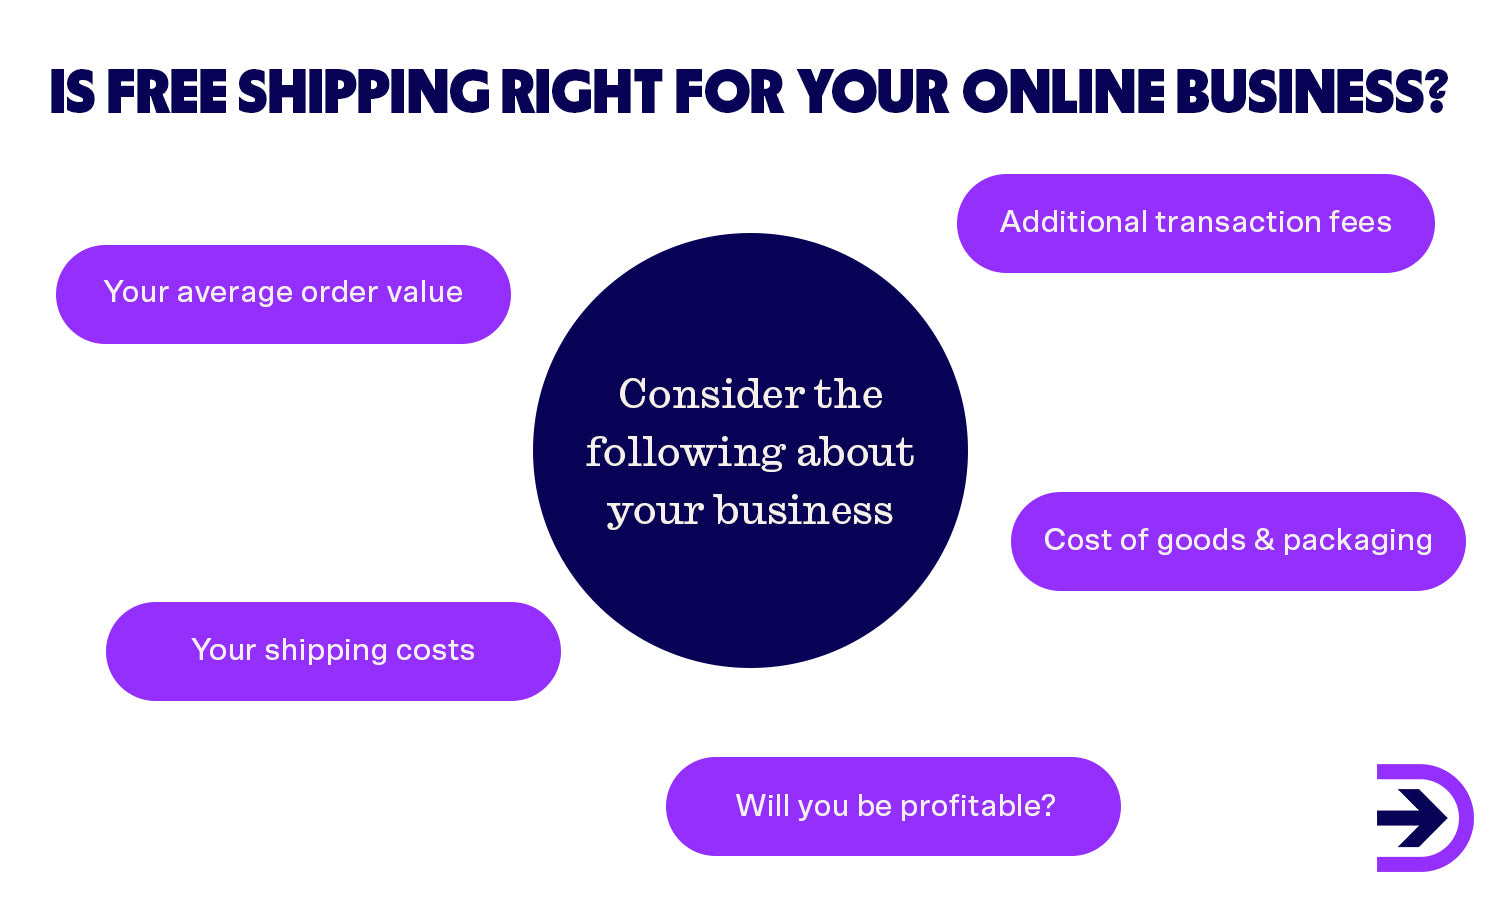 Make sure your business can continue to be profitable before considering if and how to offer free shipping.